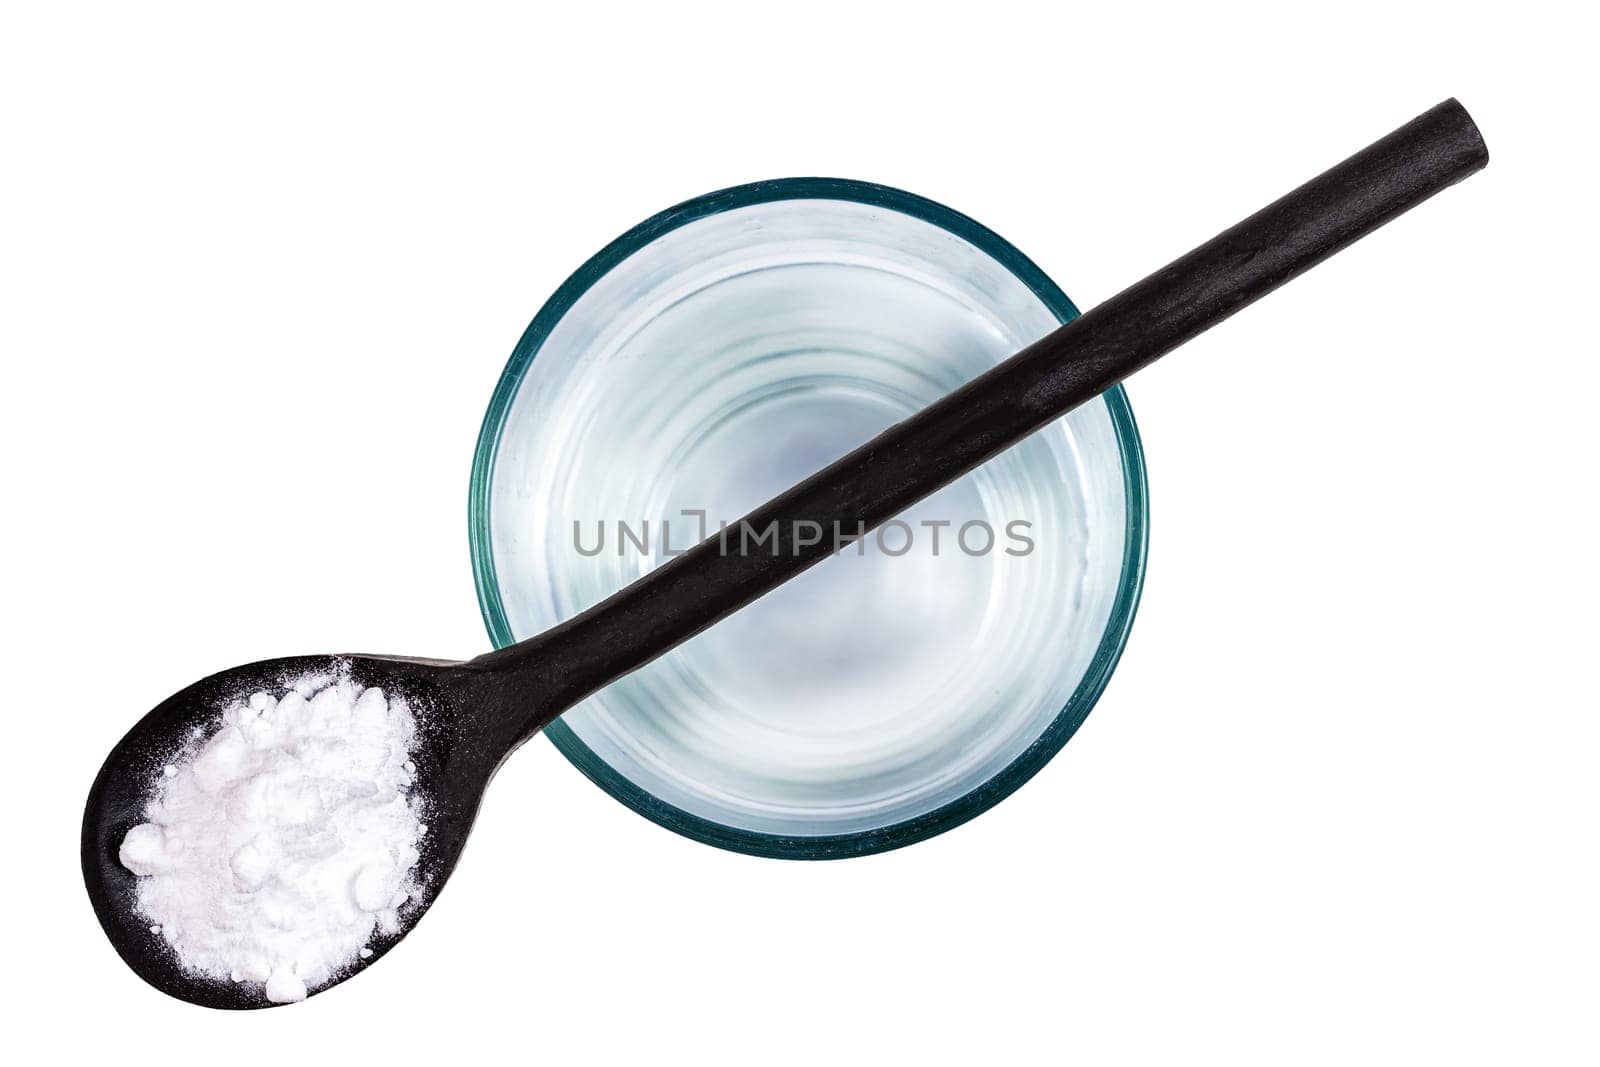 Spoon of baking soda over glass of water, isolated on white backgrpnd by JPC-PROD